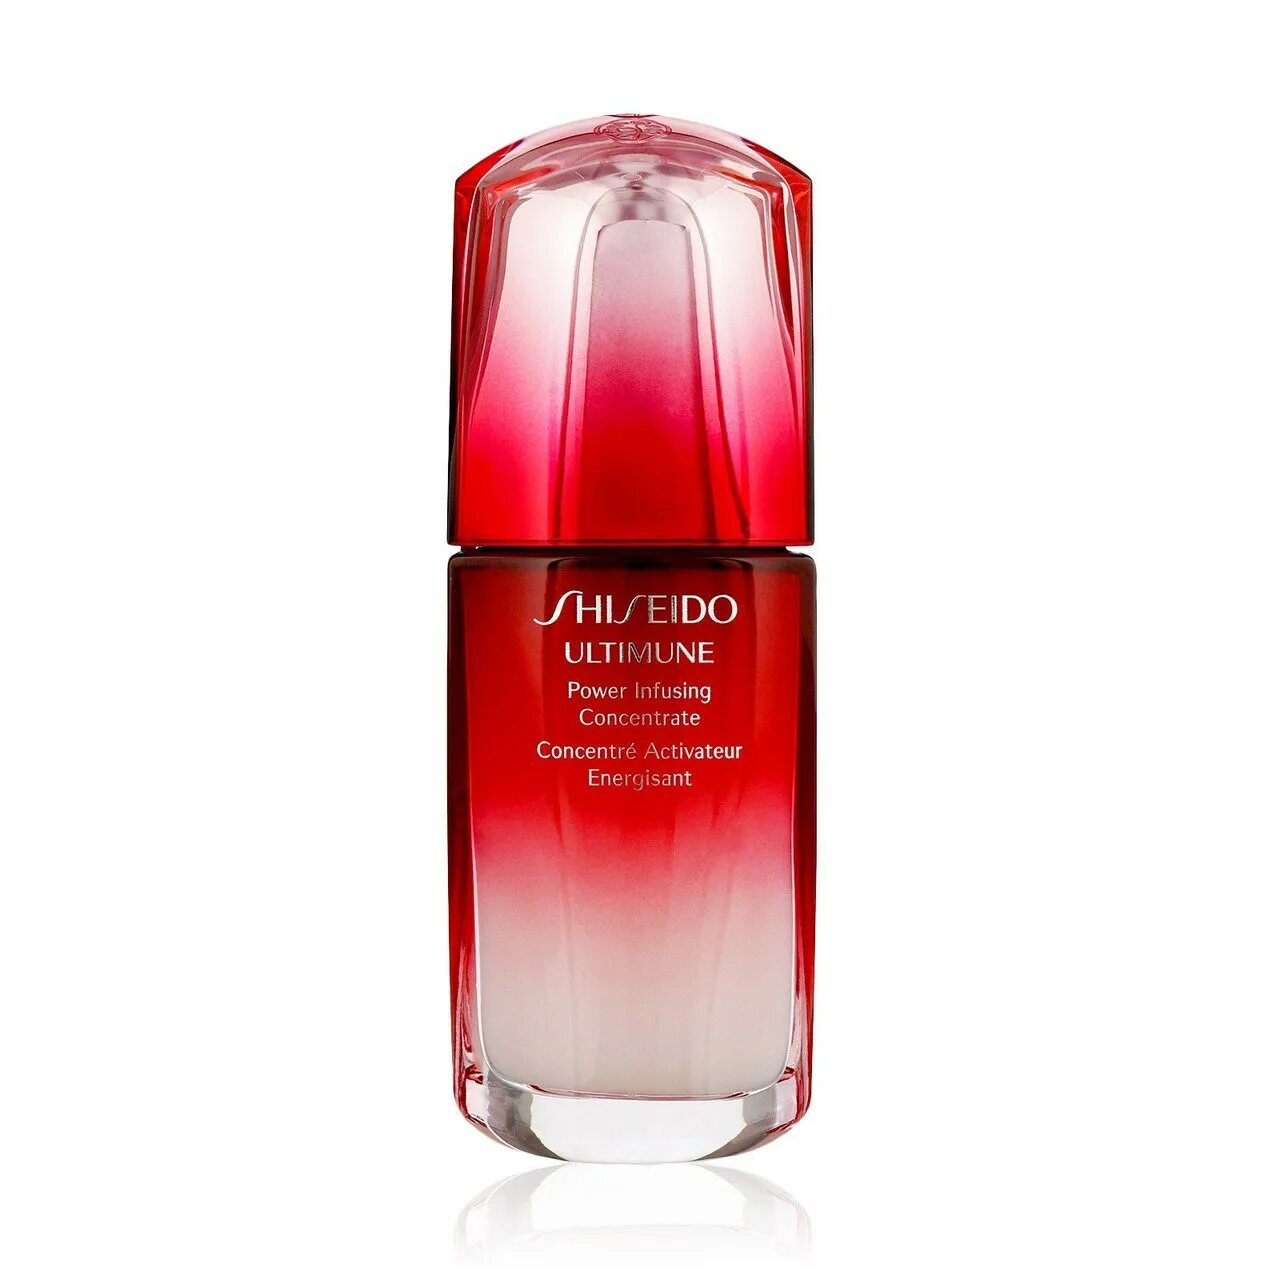 Shiseido concentrate. Shiseido Ultimune Power infusing Concentrate. Ultimune концентрат шисейдо. Ultimune концентрат шисейдо Power infusing. Концентрат Shiseido Ultimune Power infusing Concentrate.